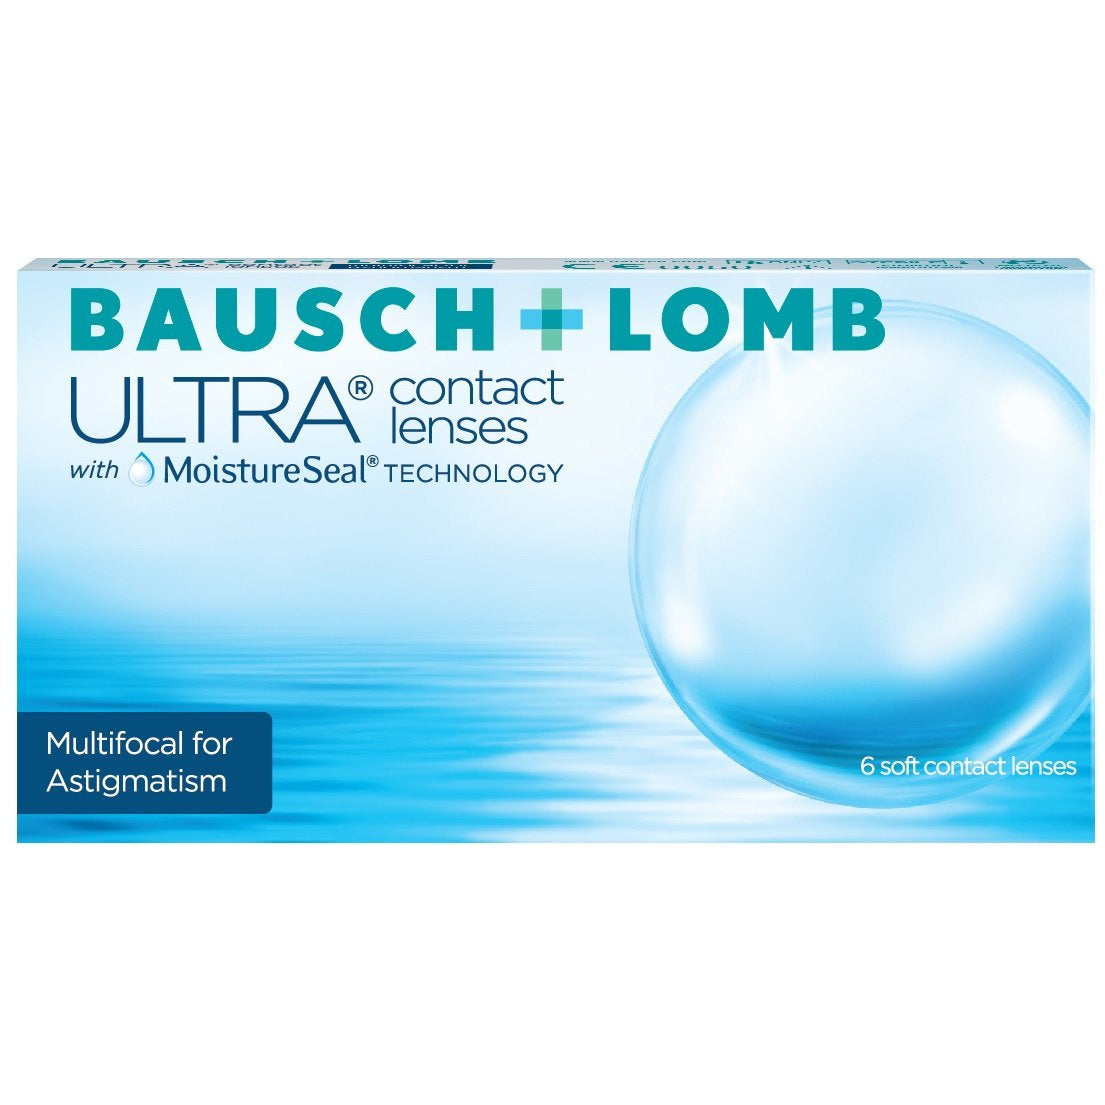 Bausch + Lomb ULTRA Multifocal for Astigmatism Contact Lenses